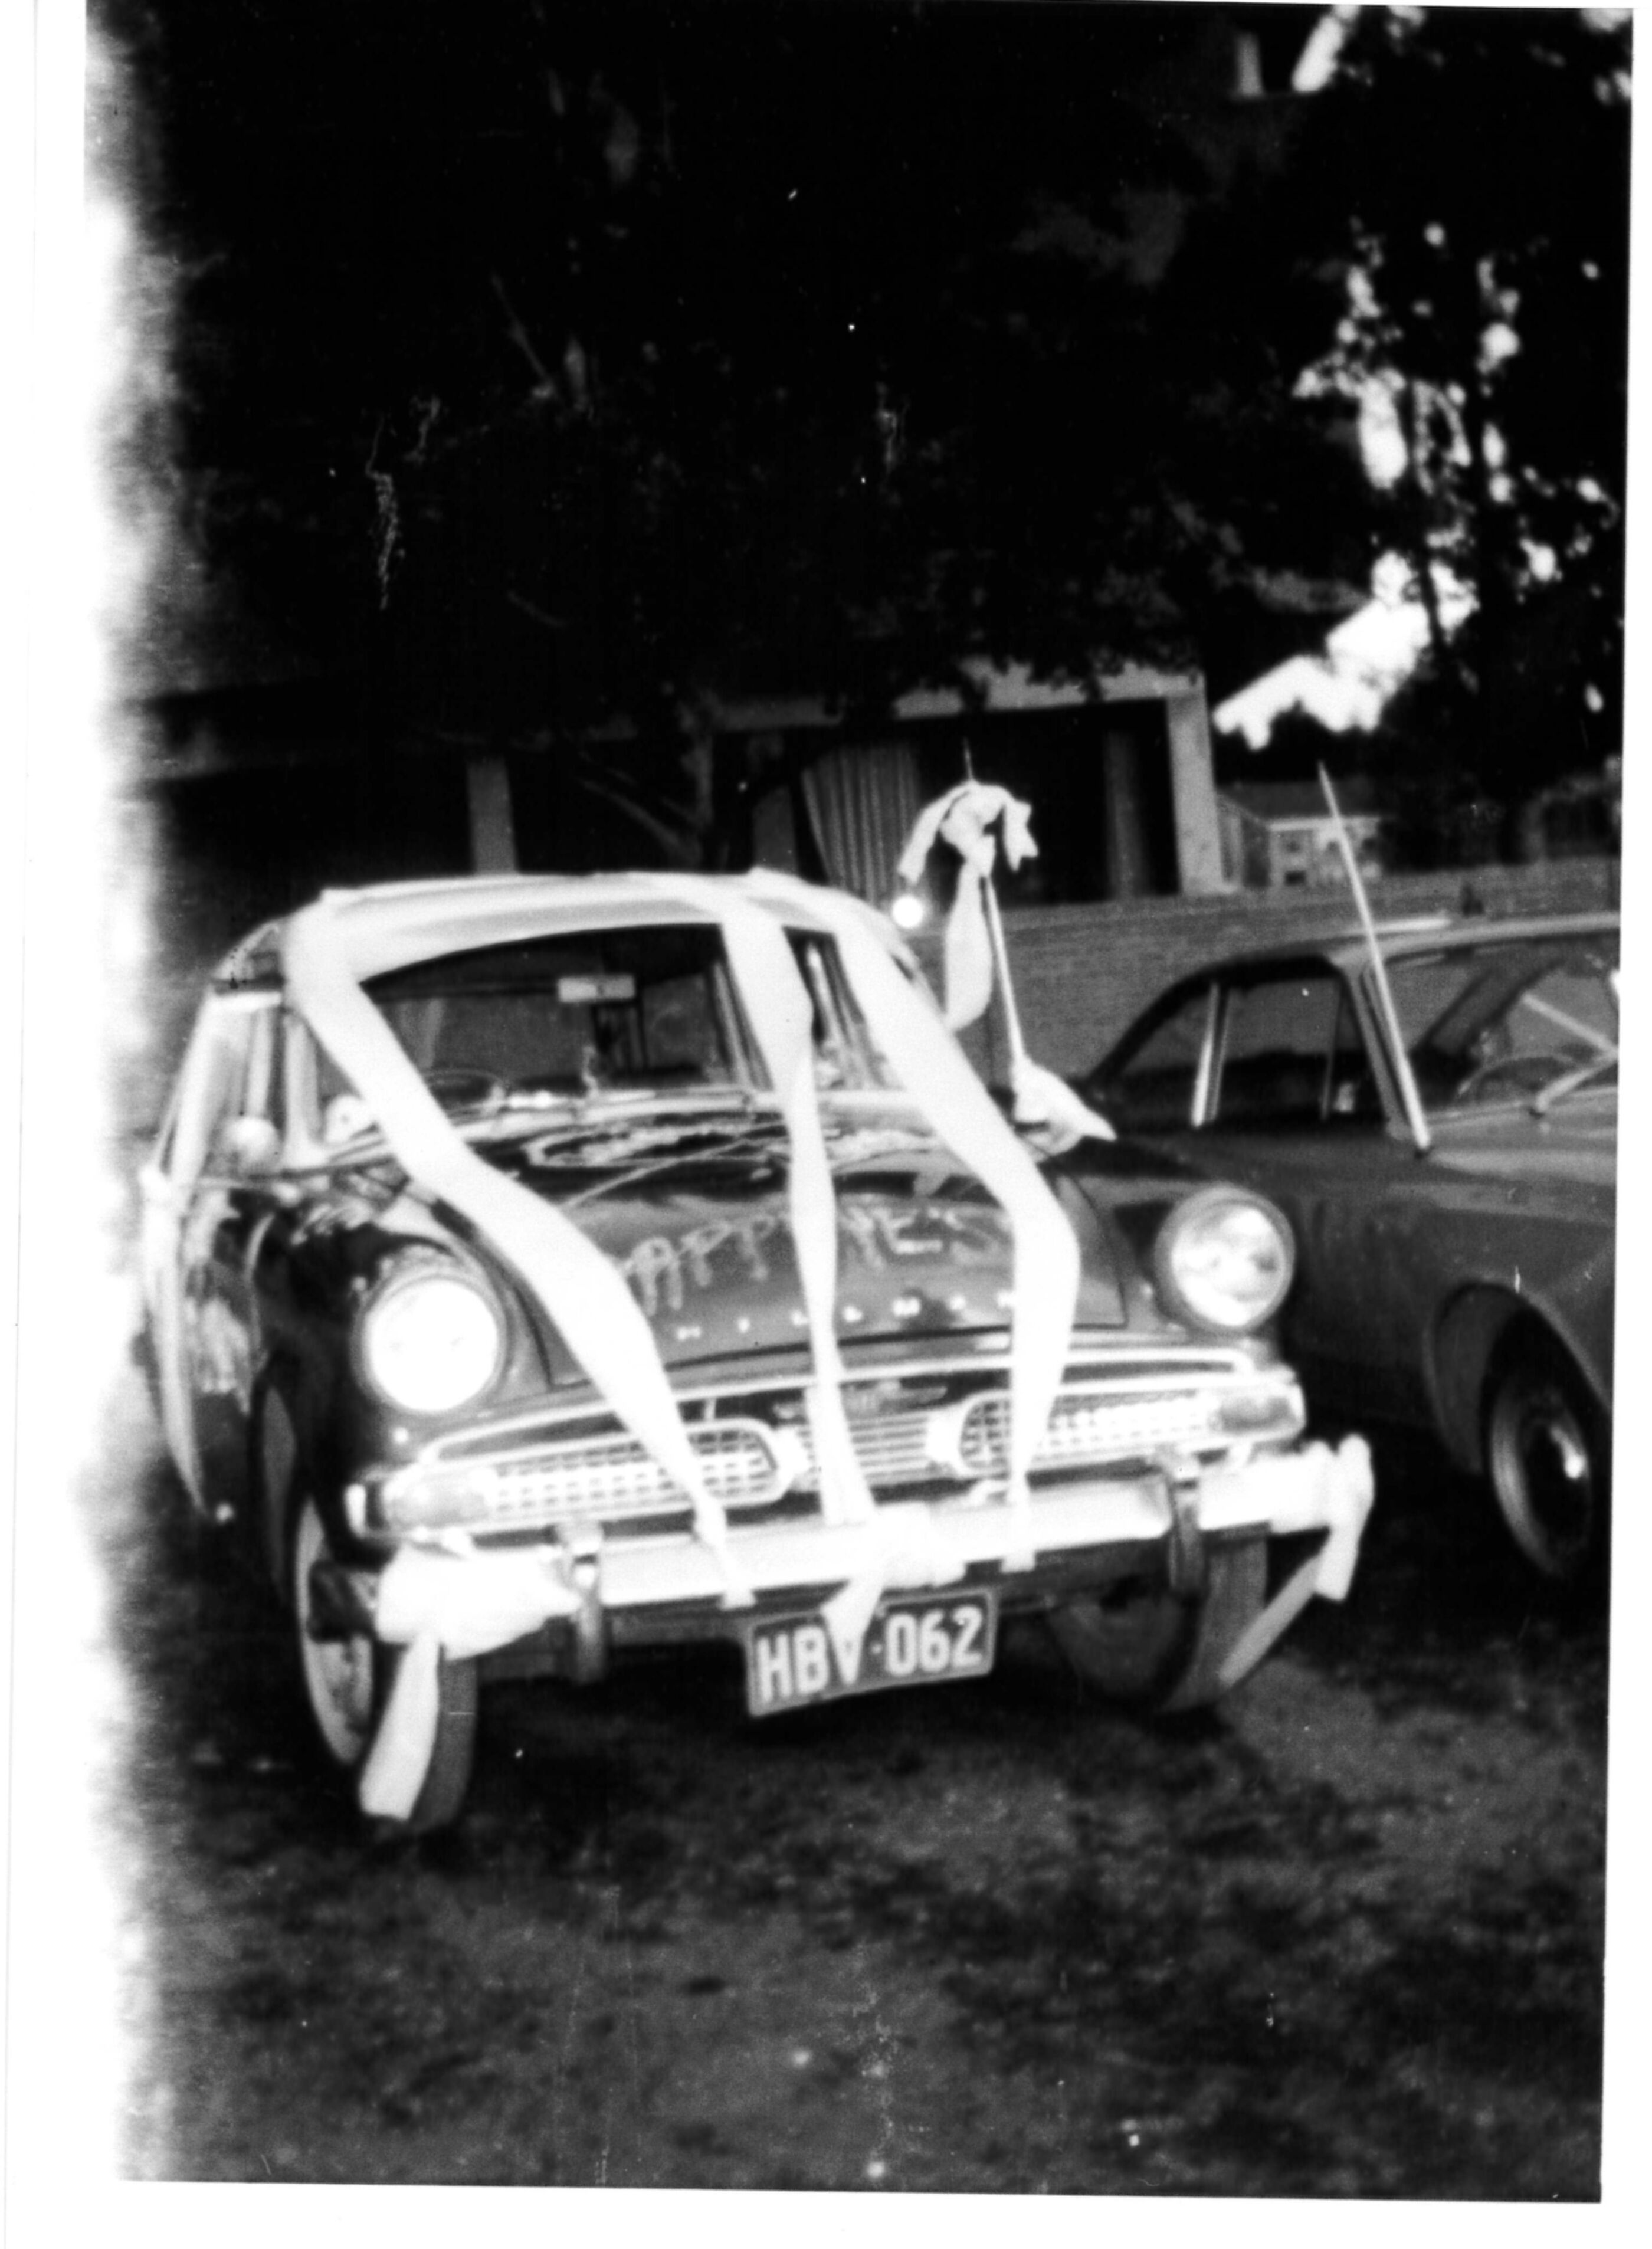 Edna Dundas Photo 8 The Hillman decked out as getaway vehicle scanned